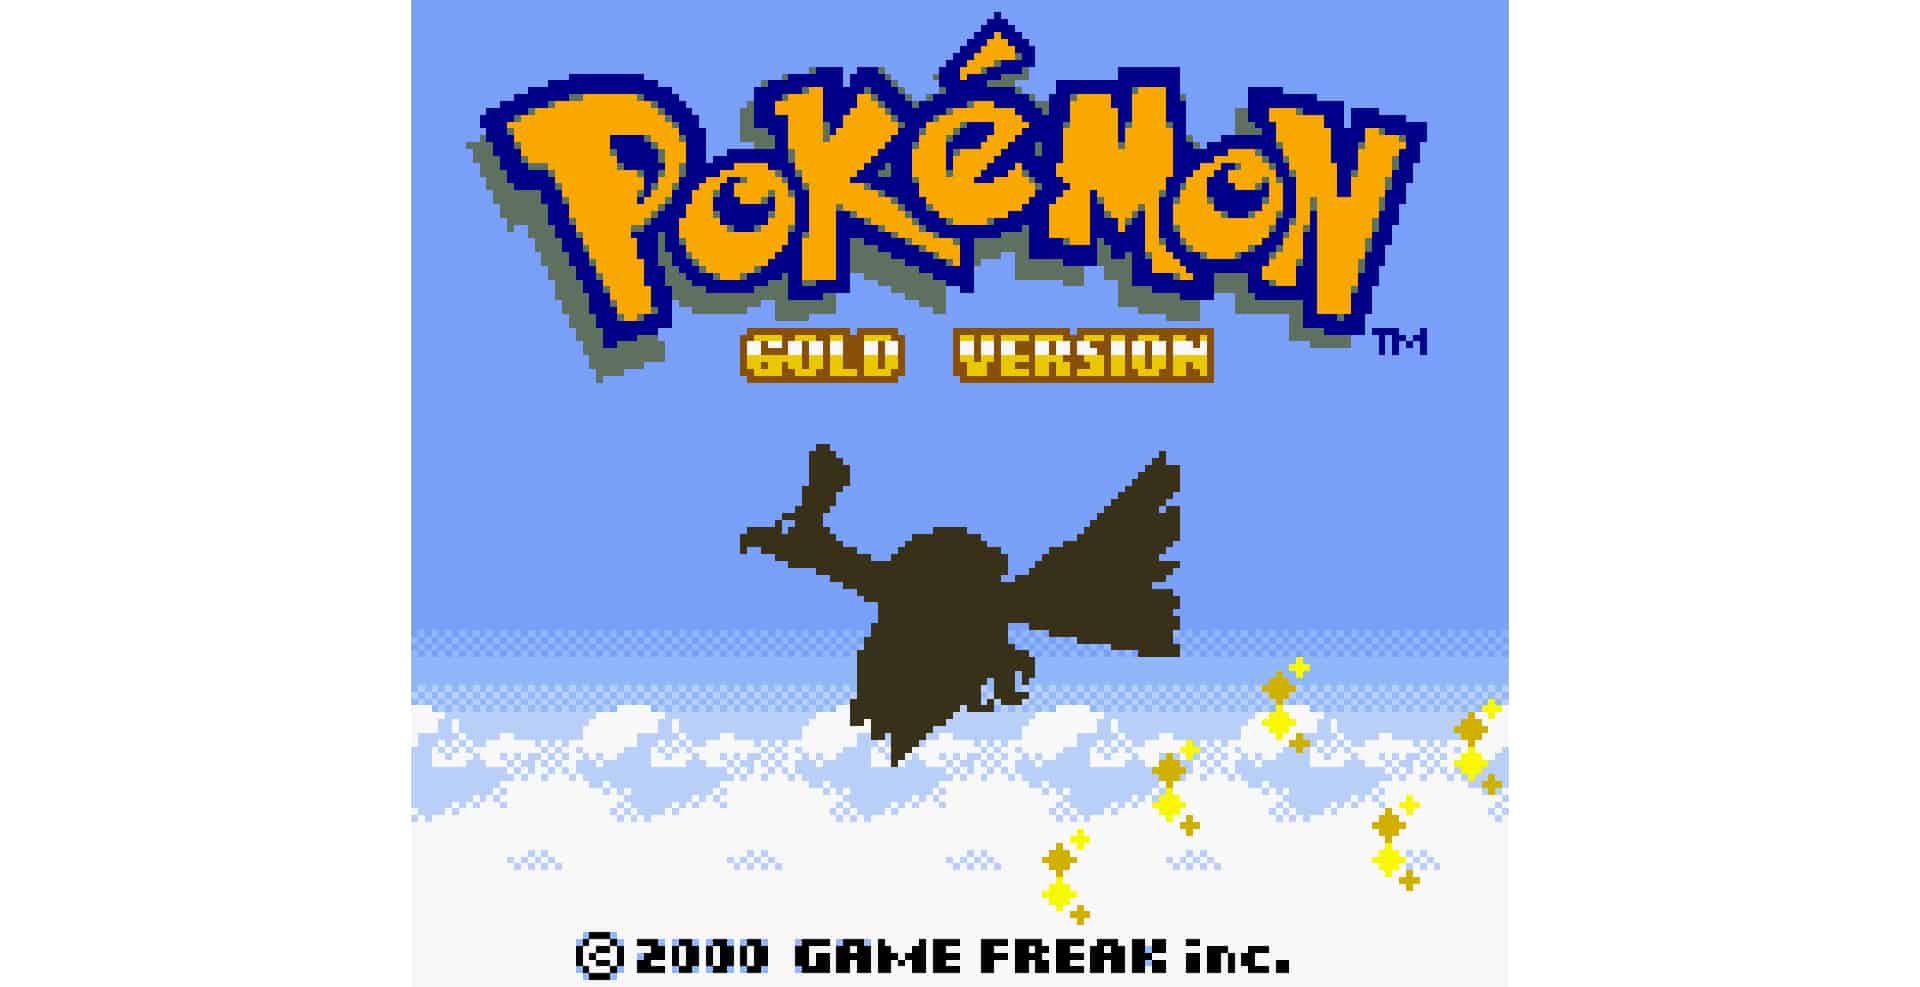 Pokemon Heart Gold Cheats - Action Replay Codes For Nintendo DS